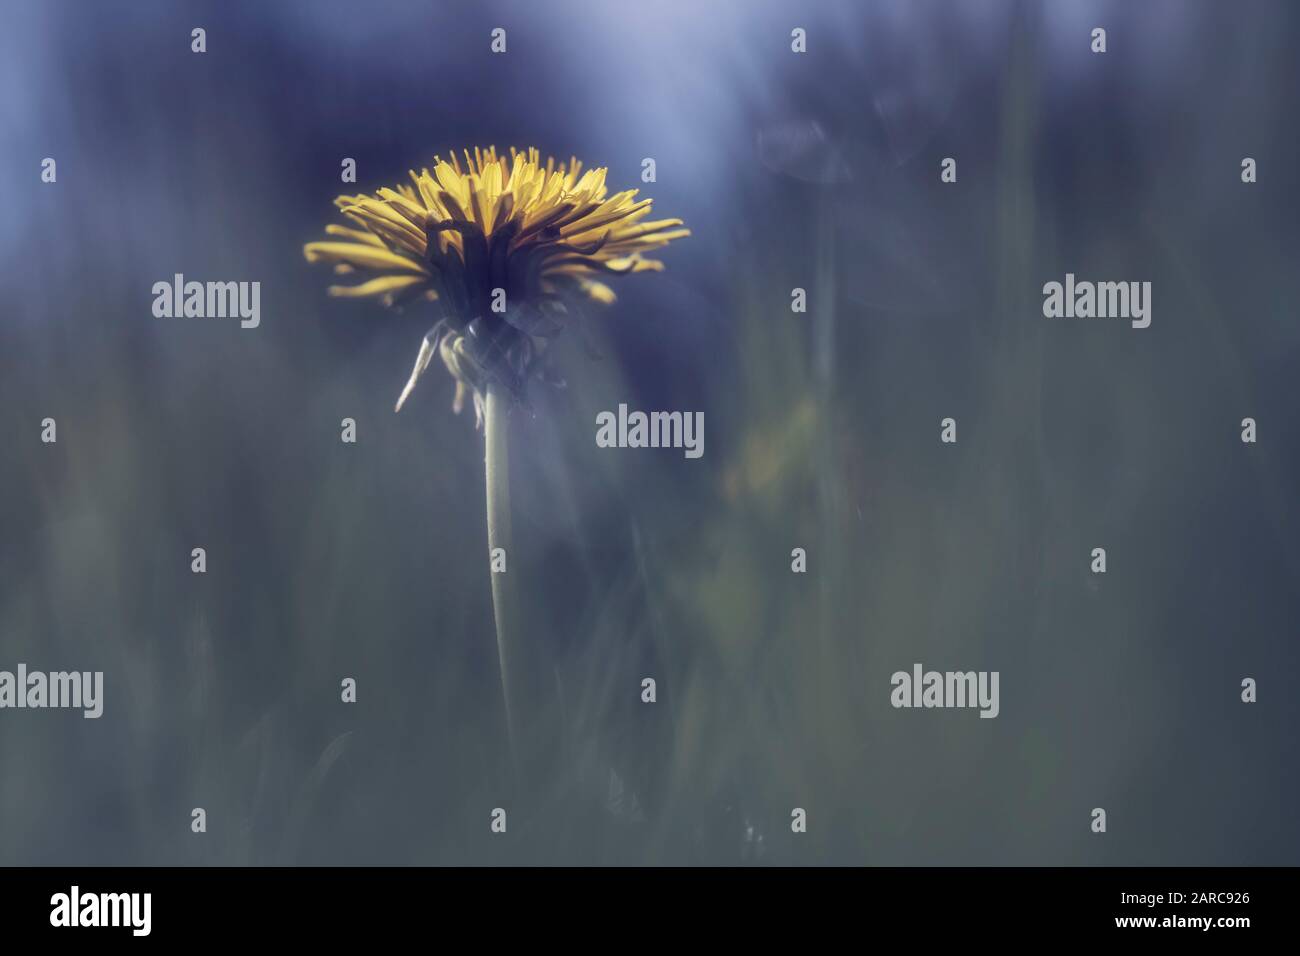 A soft dreamy dandelion flower in the grass Stock Photo